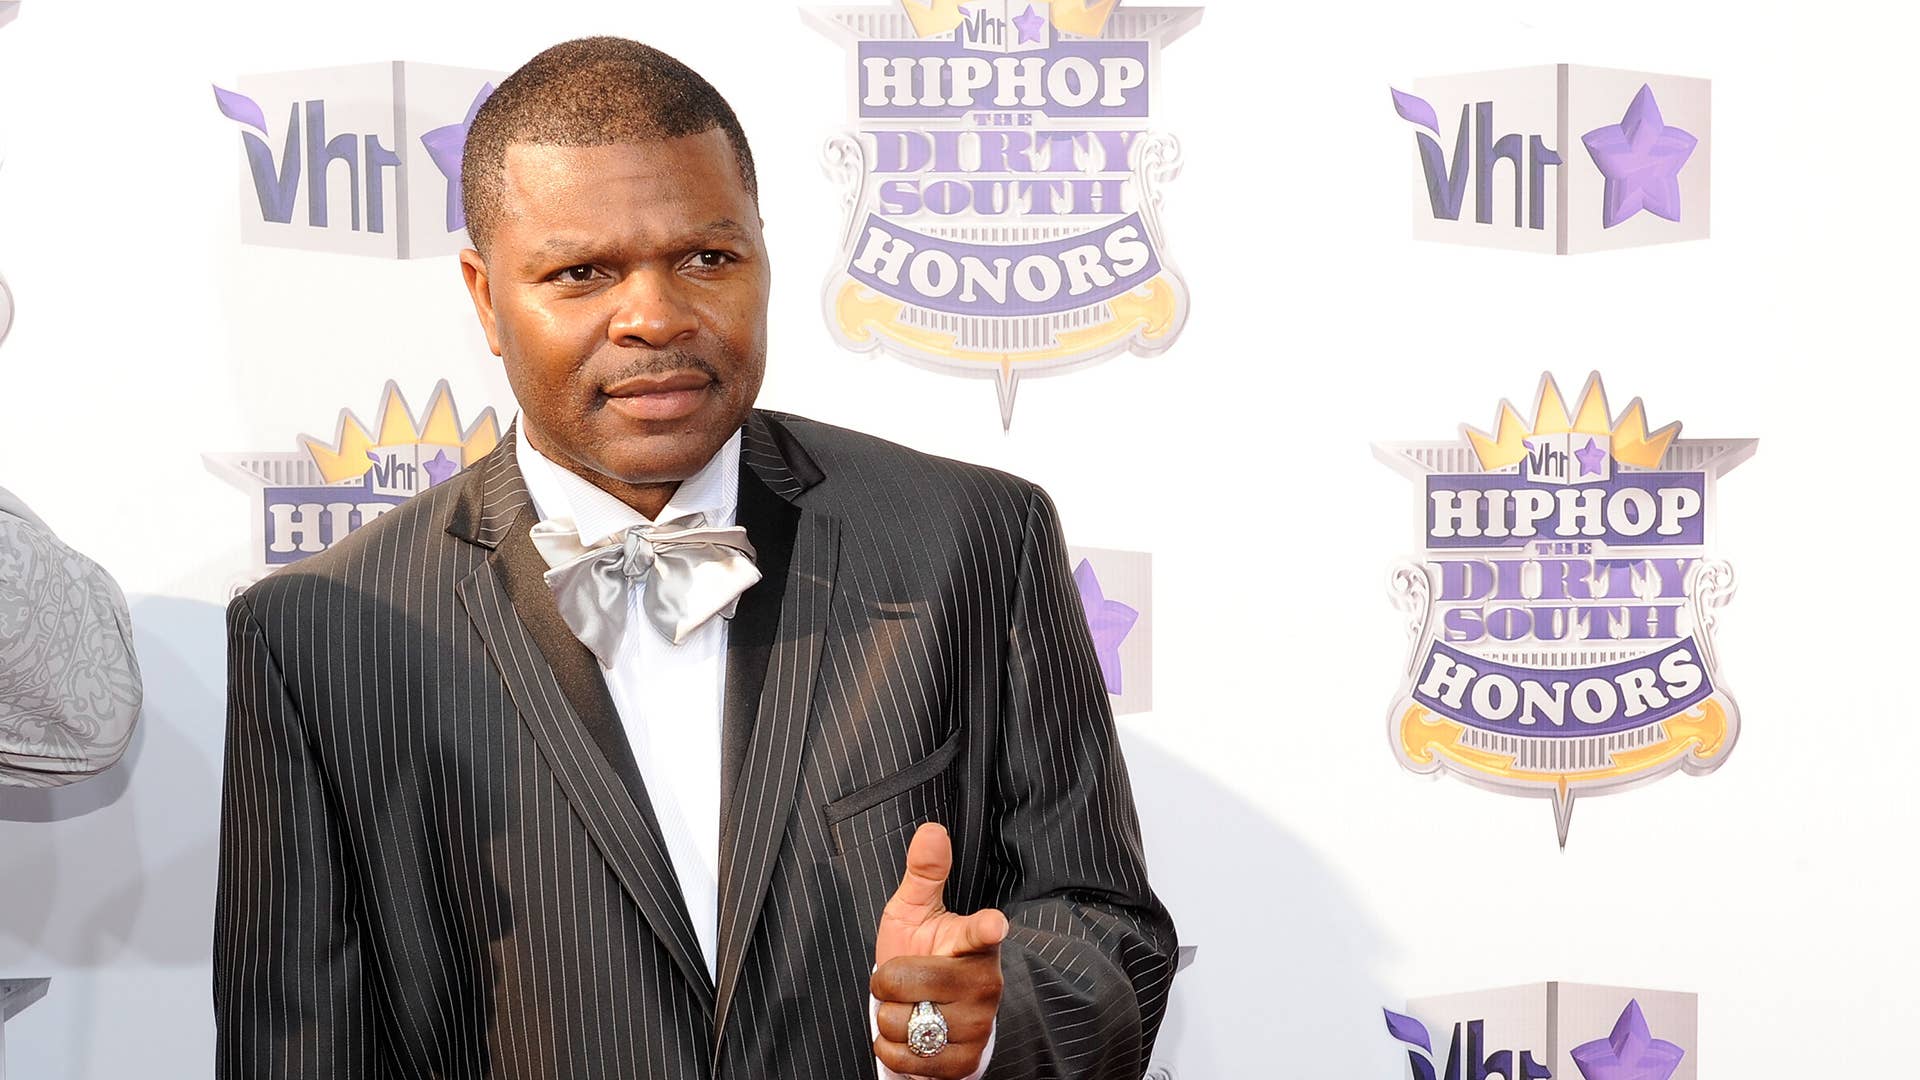 Rap a Lot Records CEO J Prince in an appearance on a VH1 red carpet